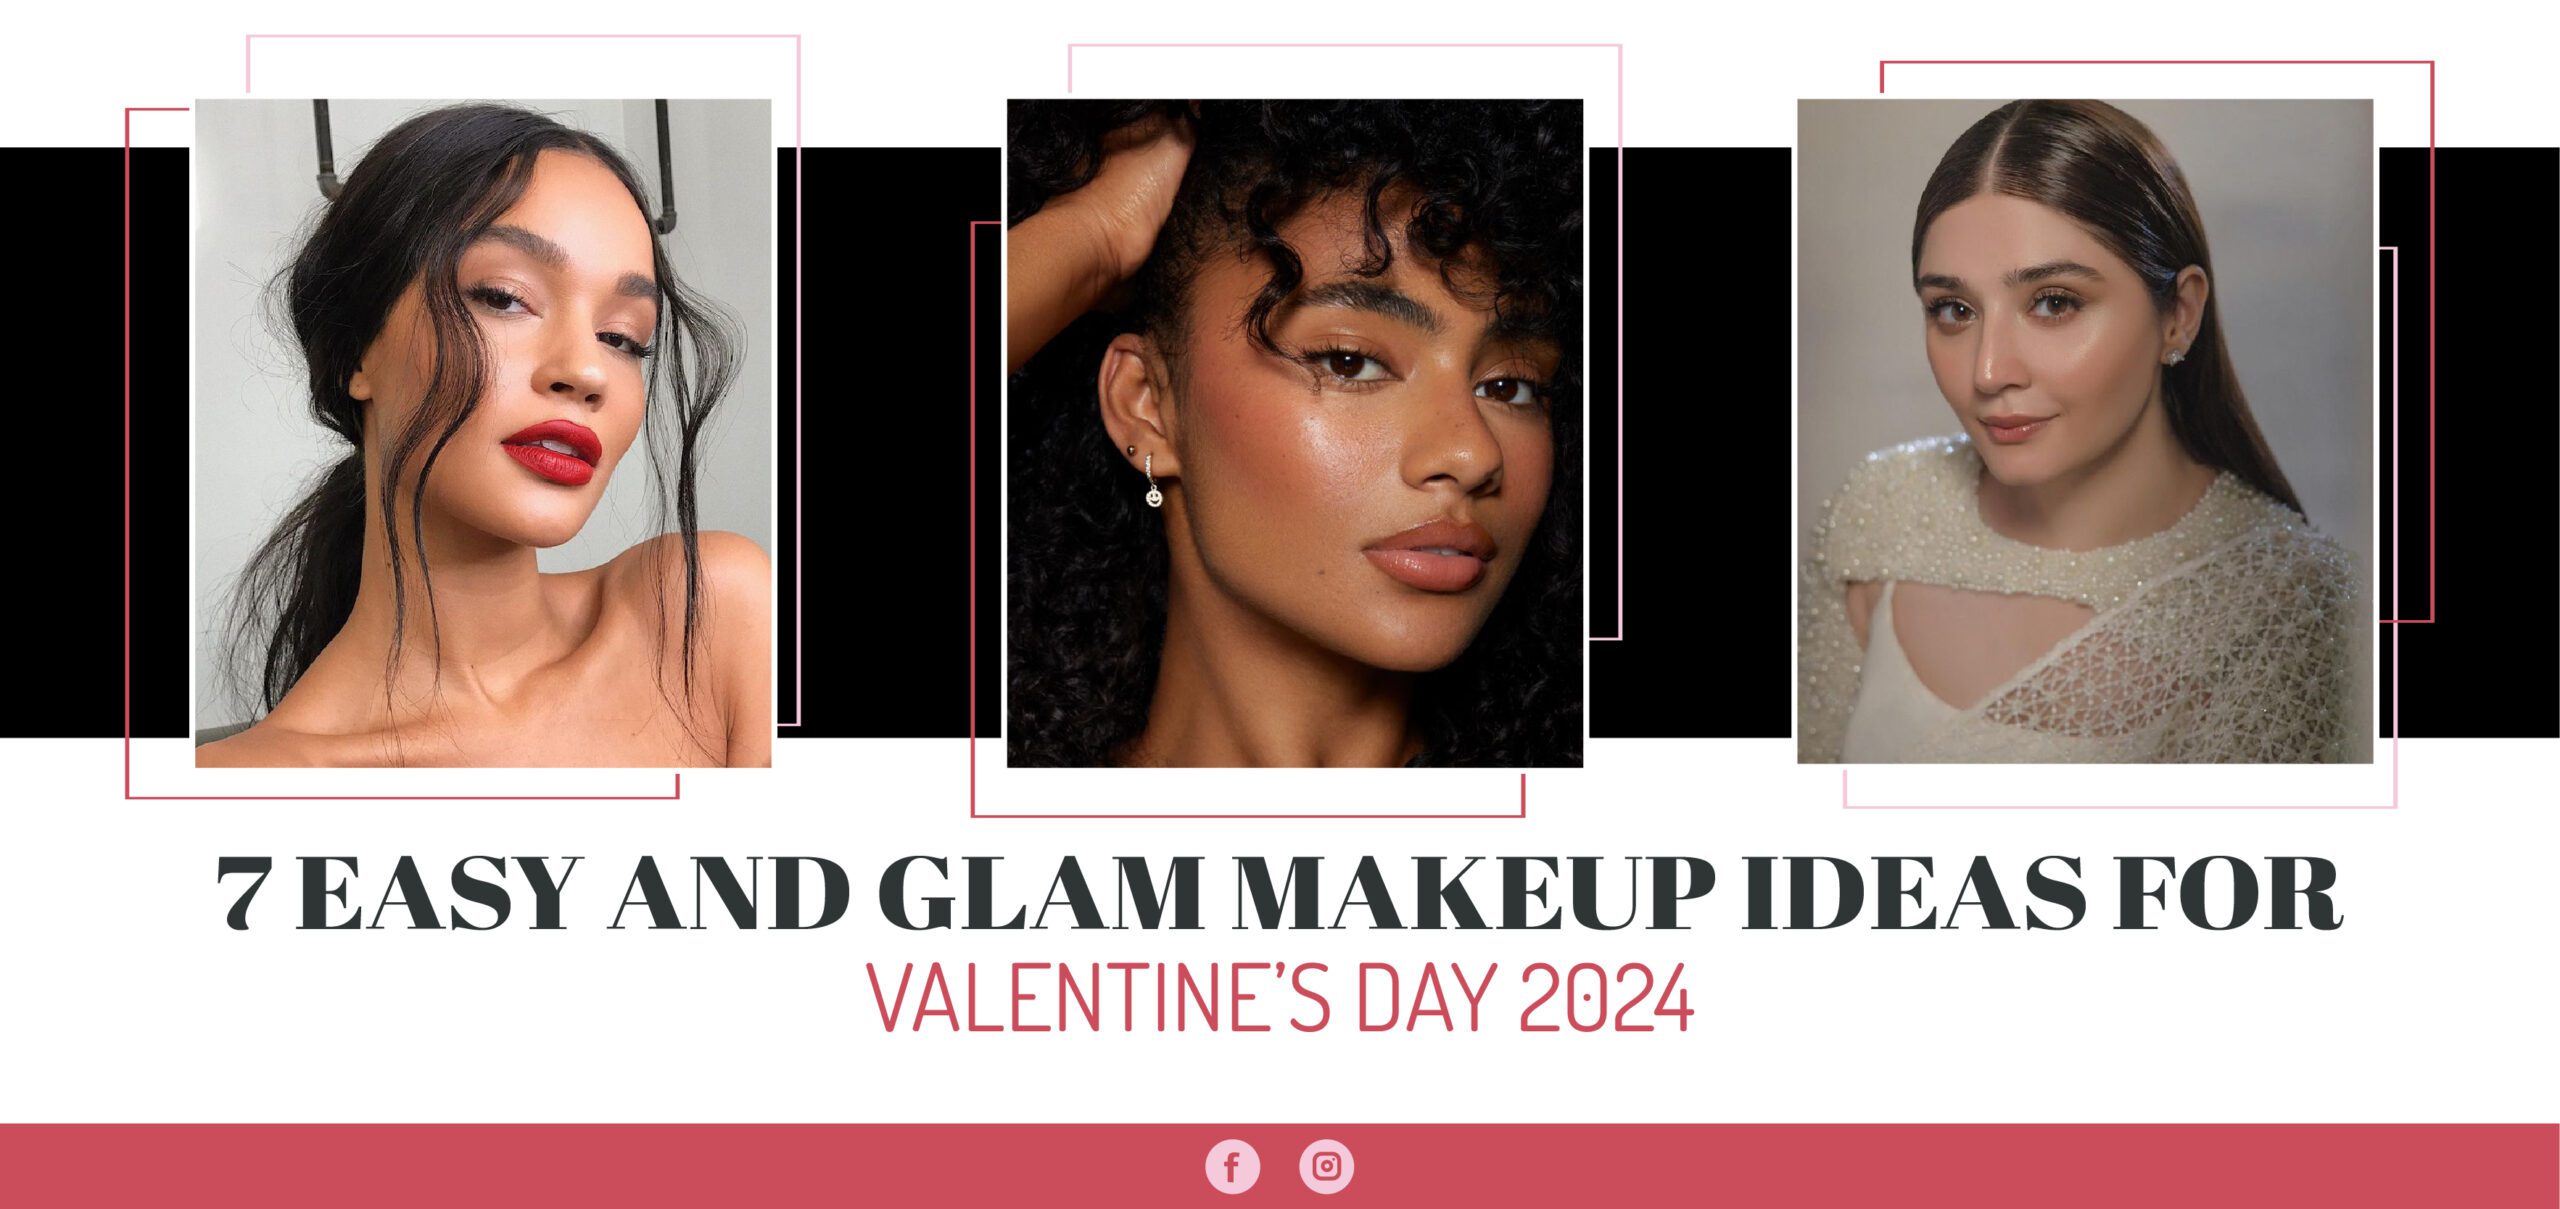 7 Easy and Glam Makeup Ideas for Valentine’s Day 2024